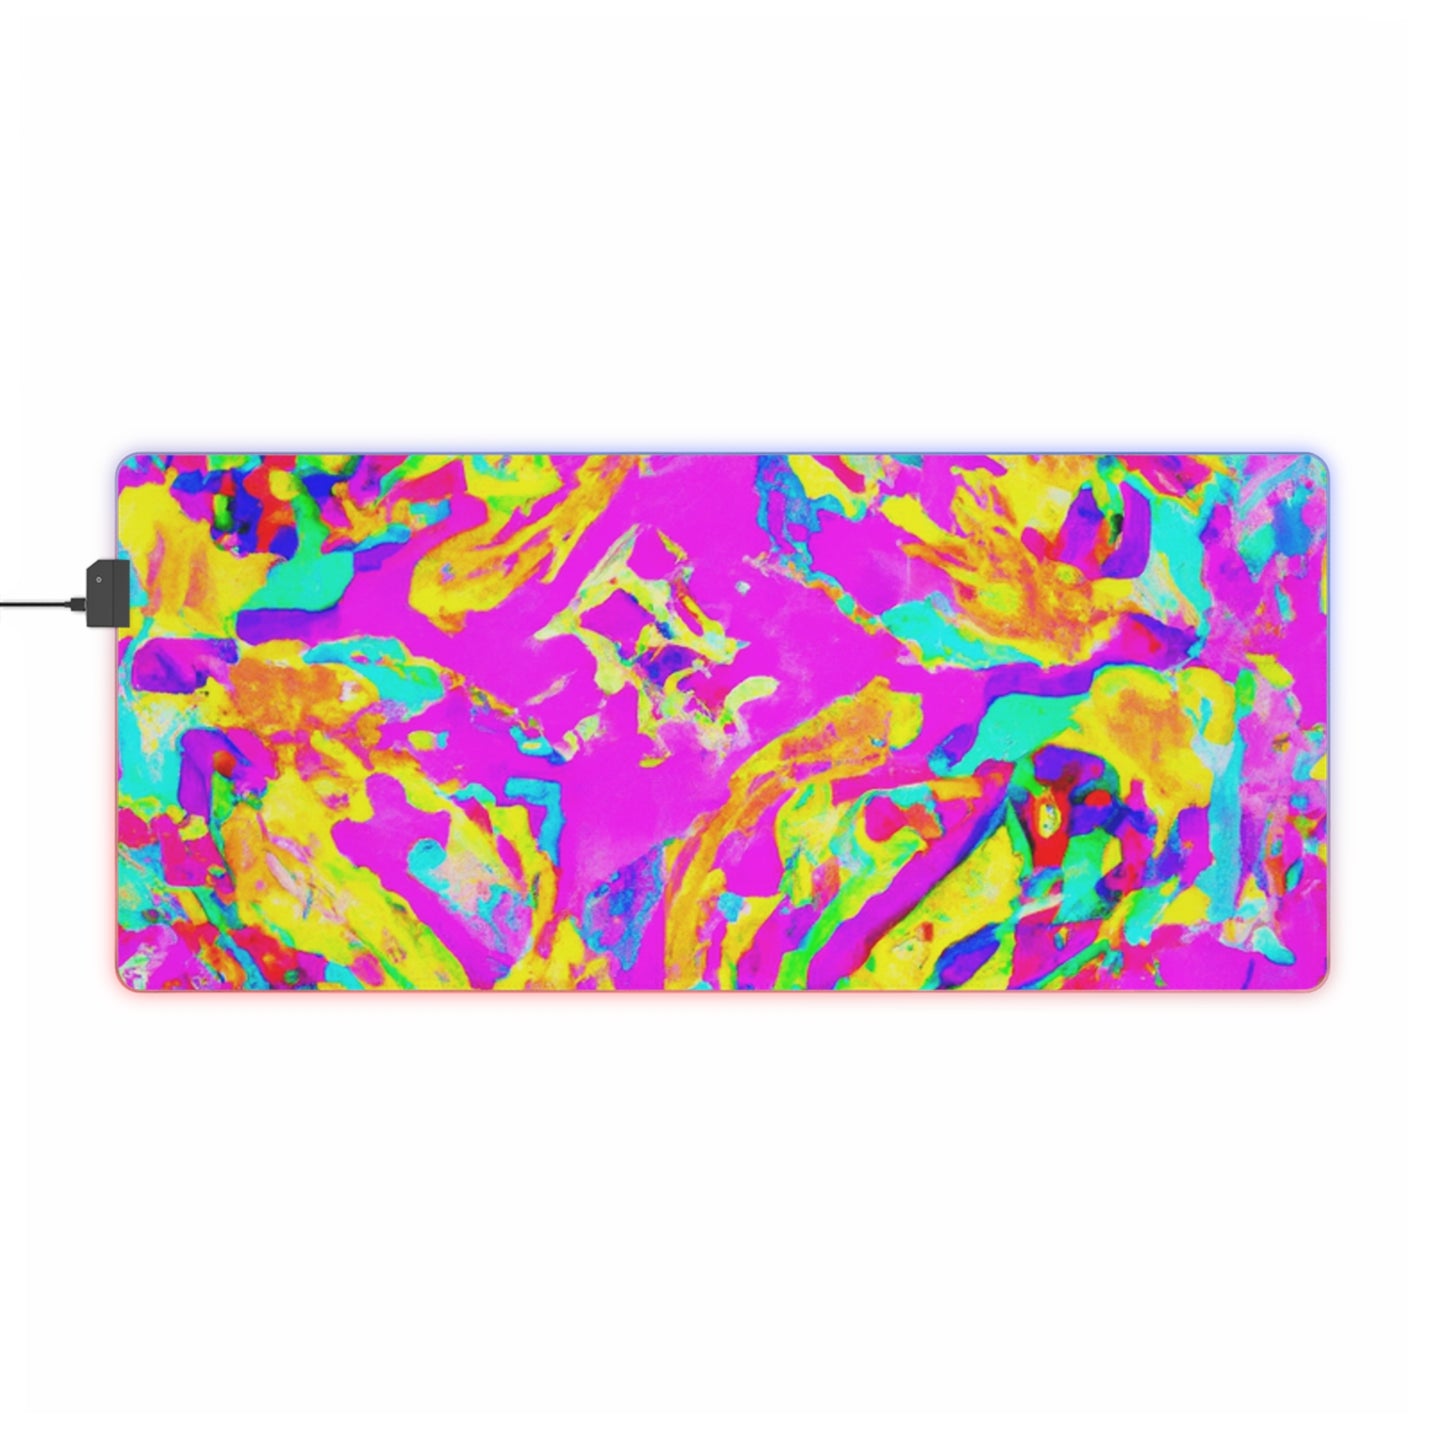 Tilly Mecha-Gunner - Psychedelic Trippy LED Light Up Gaming Mouse Pad